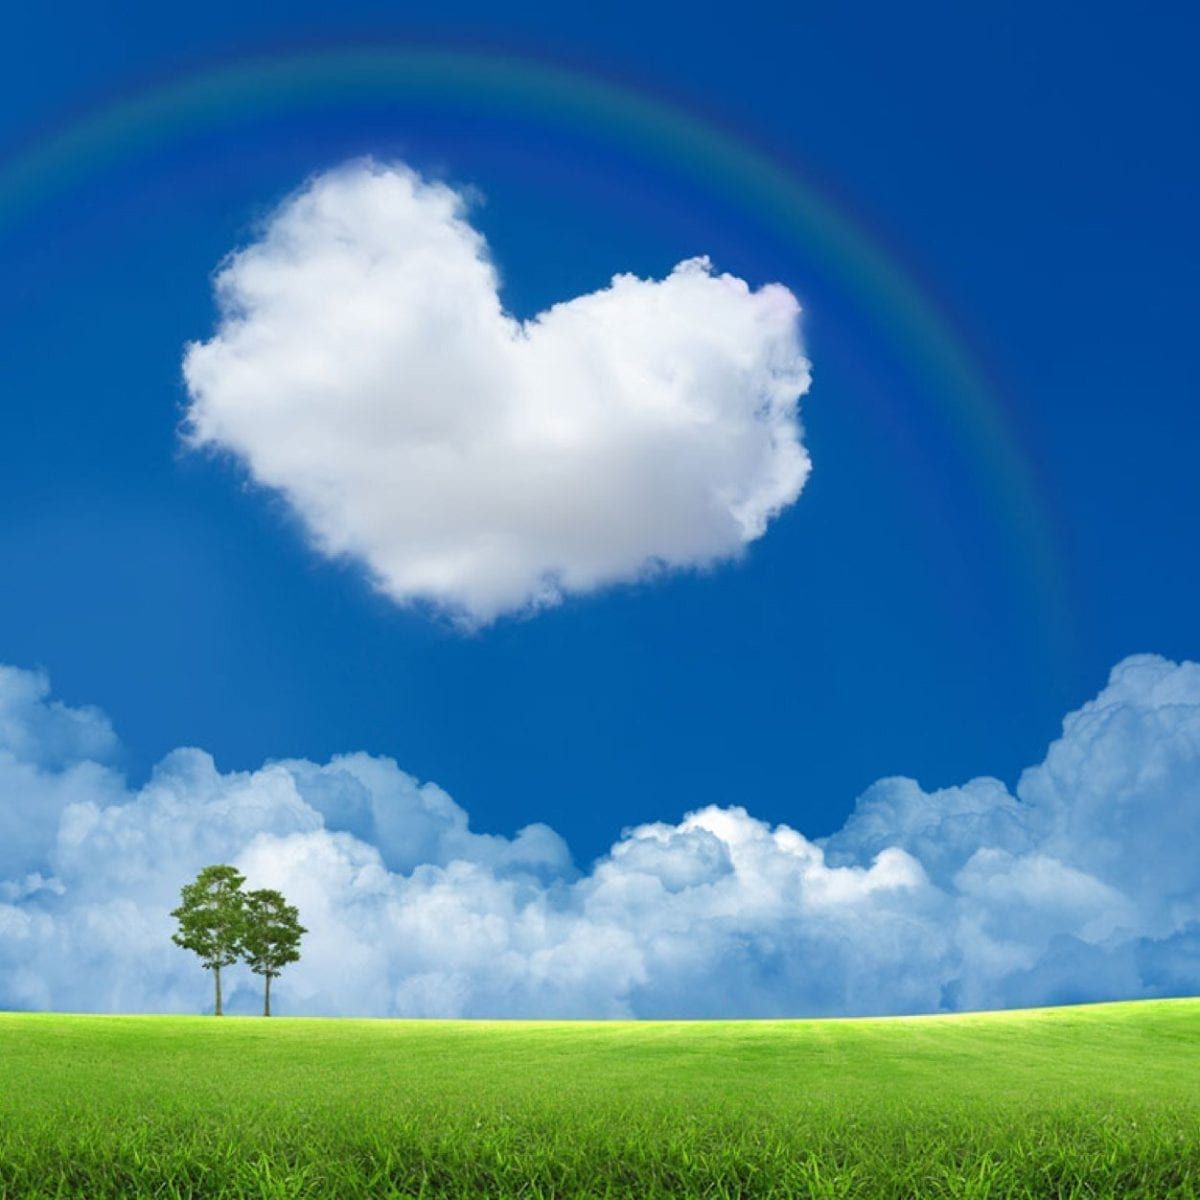 Image of a field with a cloud in the shape of a heart